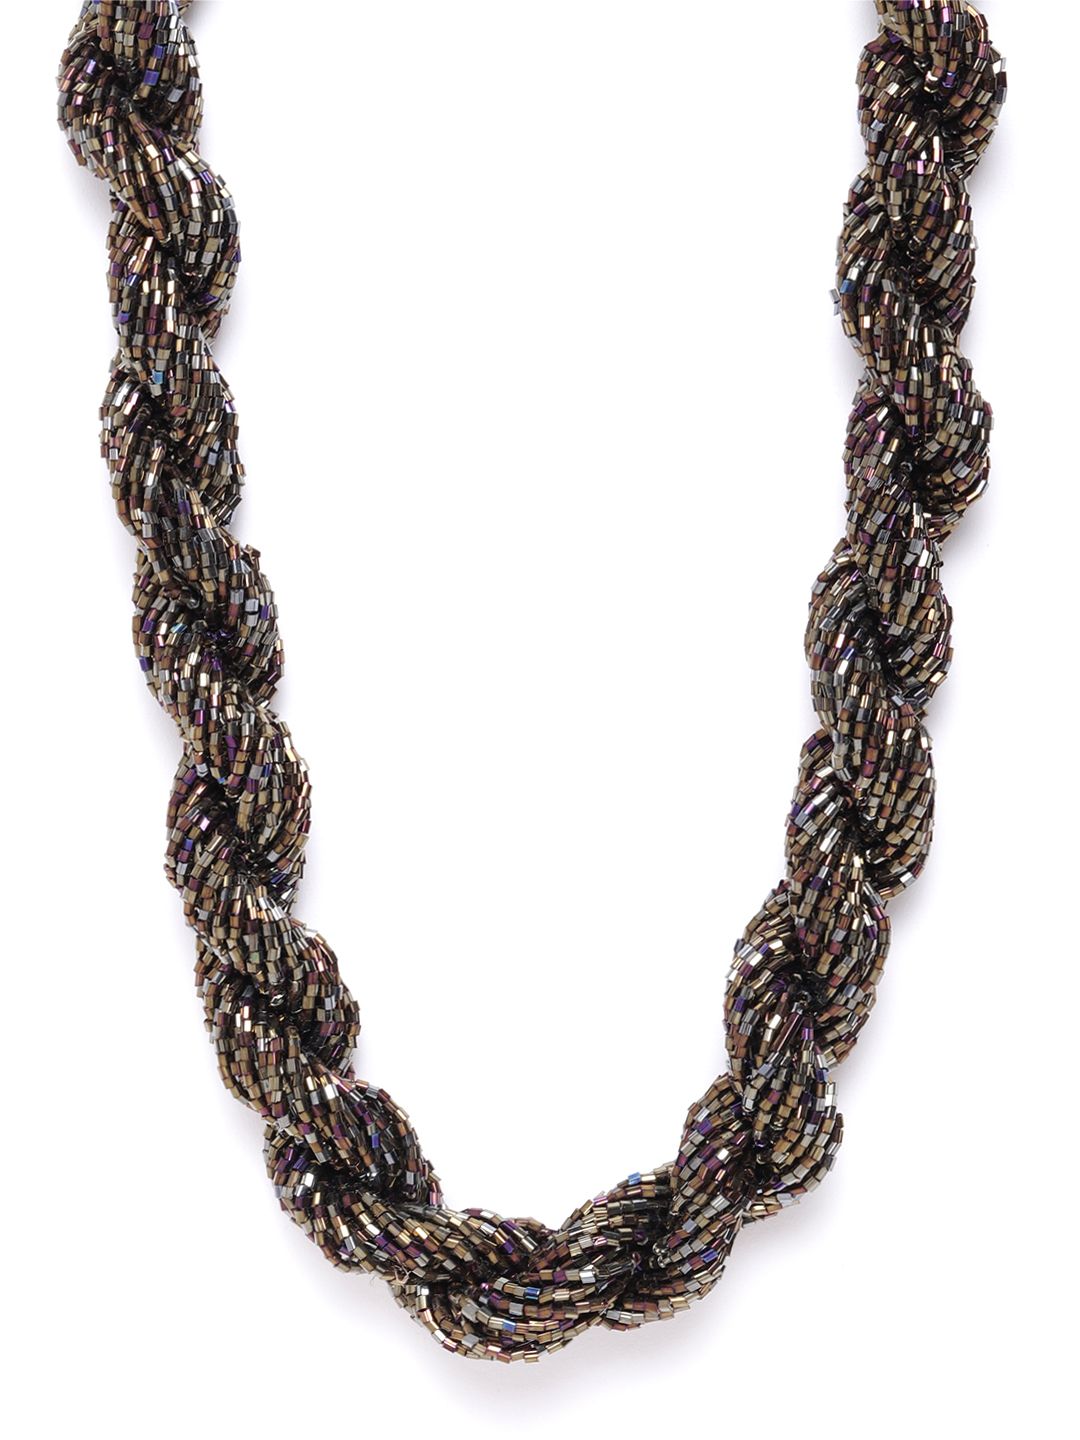 RICHEERA Gunmetal-Toned & Bronze-Toned Glass Beaded Statement Twisted Necklace Price in India